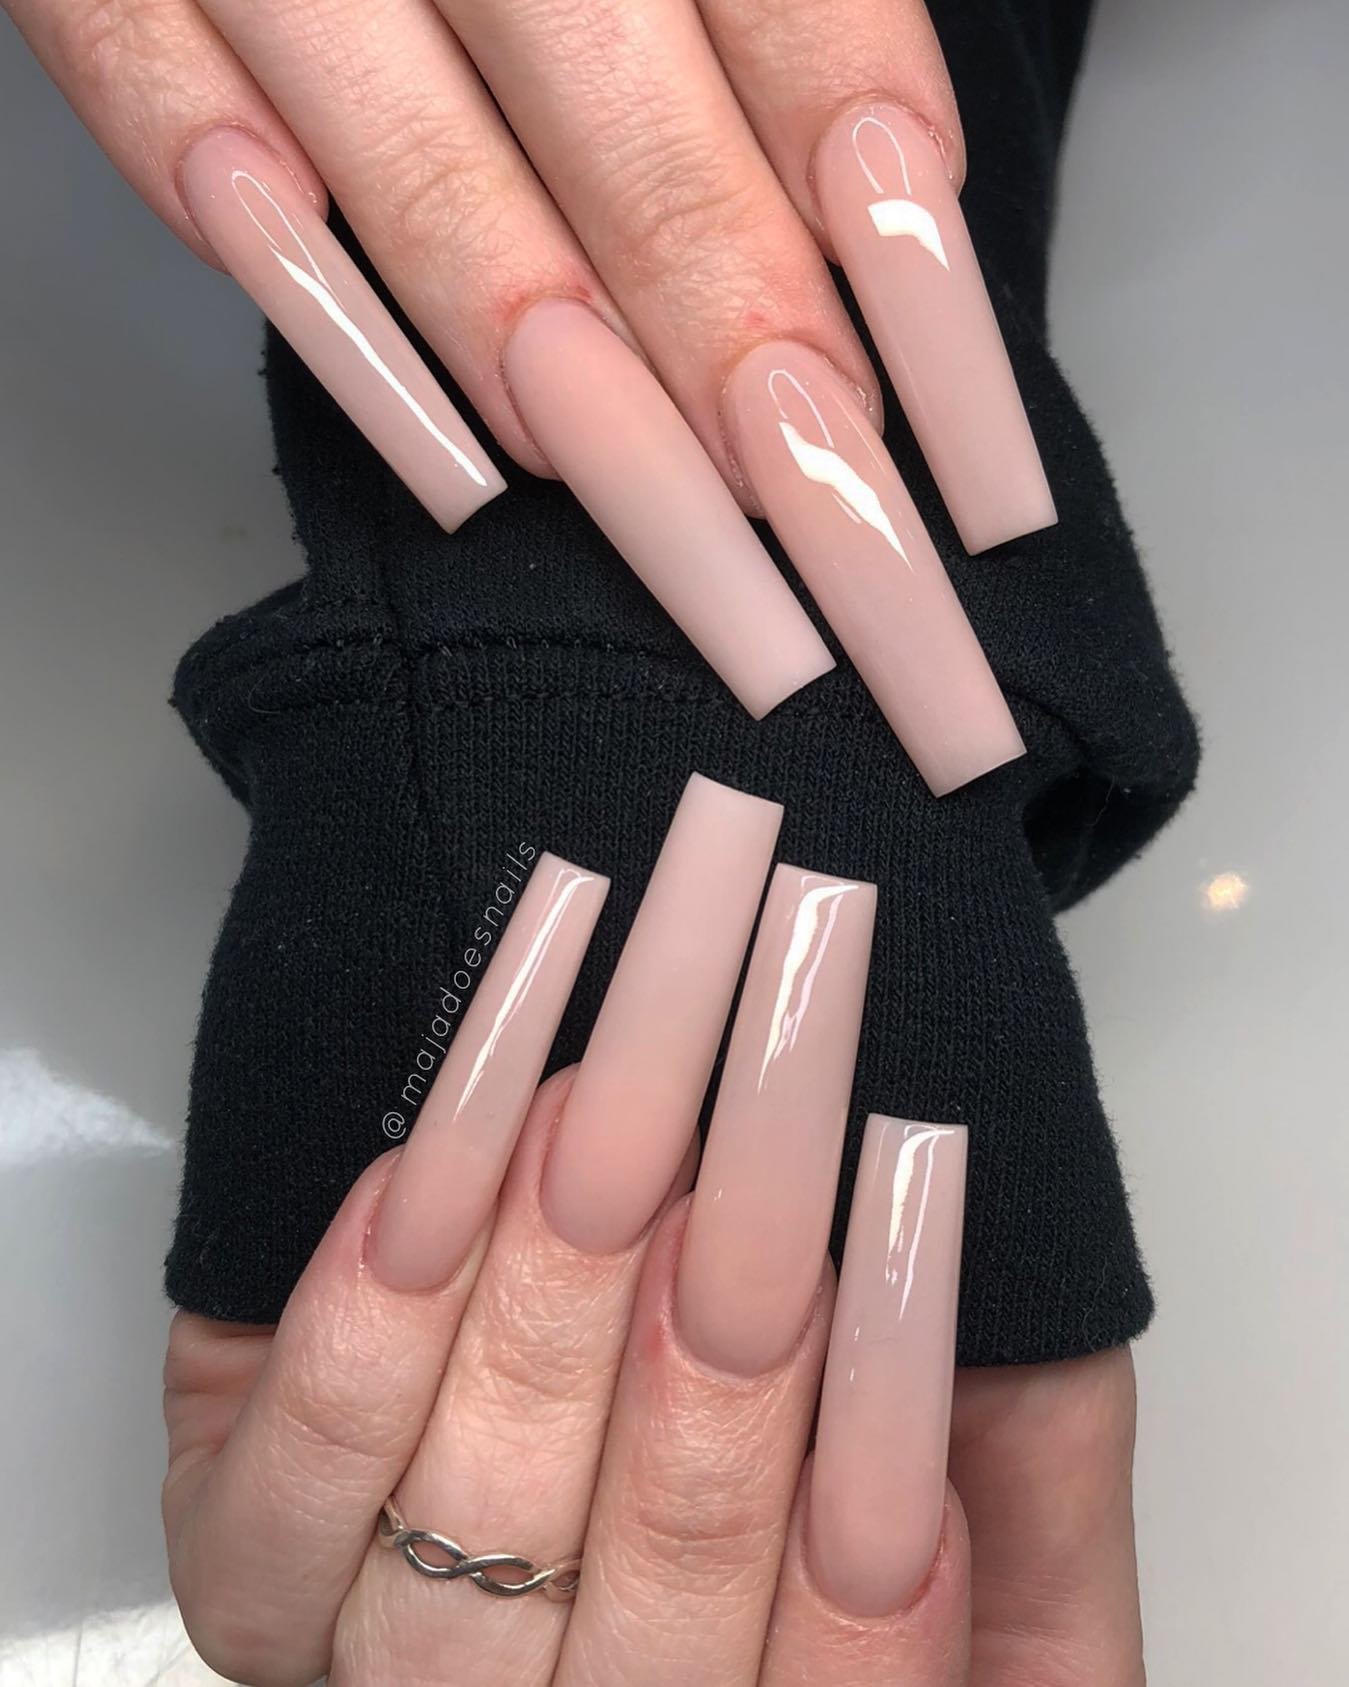 10 Long Square Acrylic Nails Trends And Tips Lovely Nails And Spa